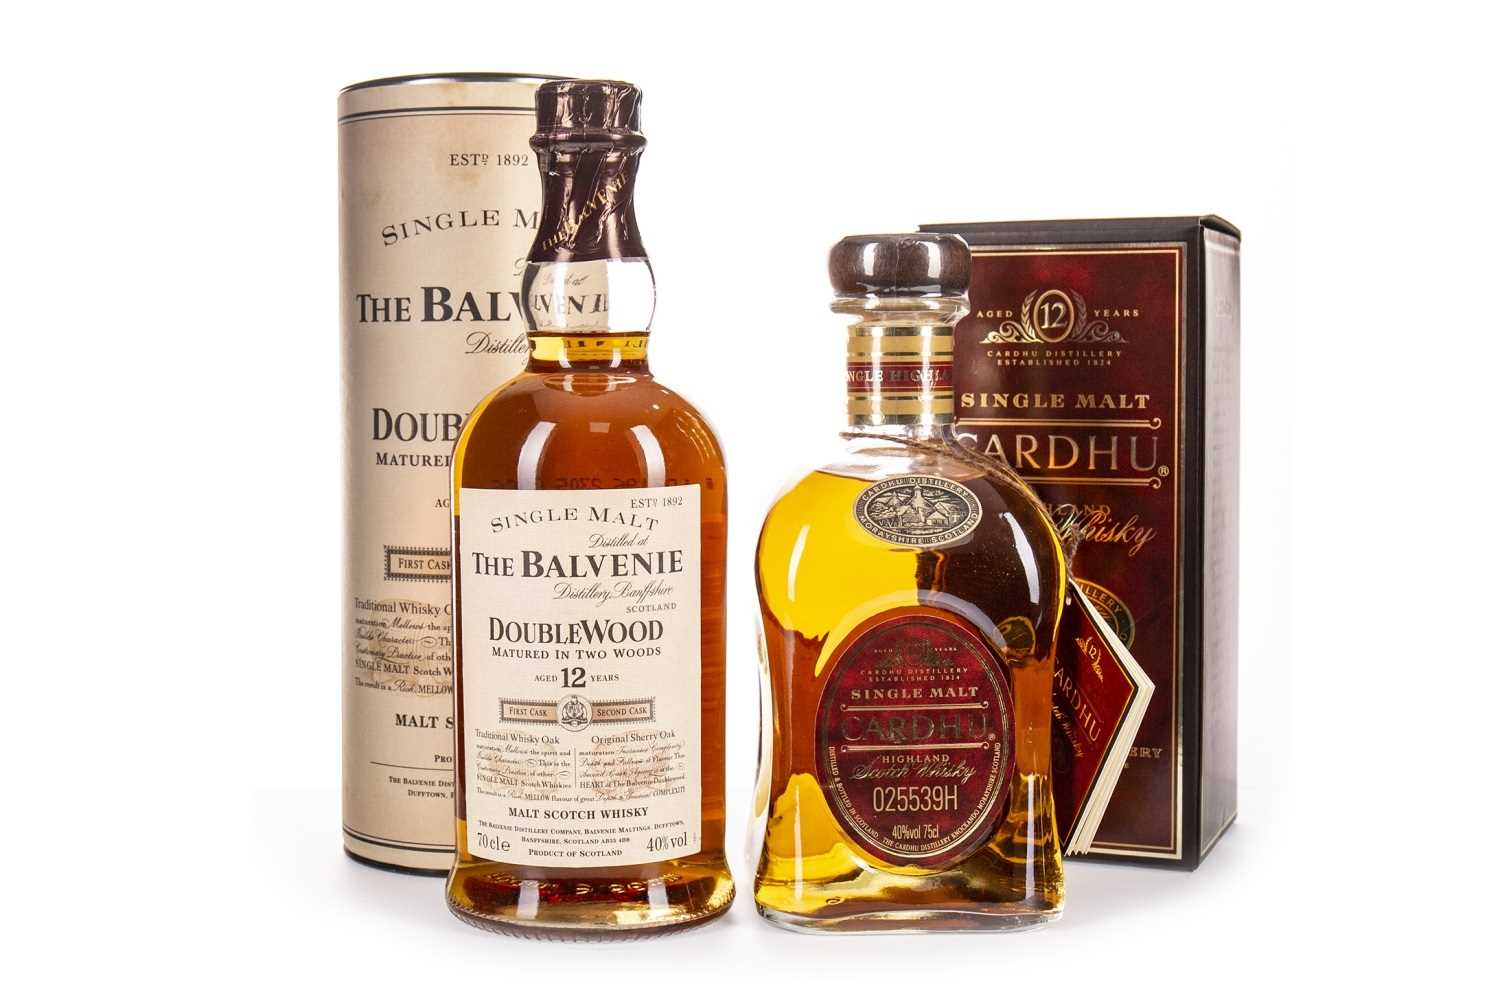 Lot 313 - BALVENIE DOUBLEWOOD 12 YEARS OLD AND CARDHU 12 YEARS OLD